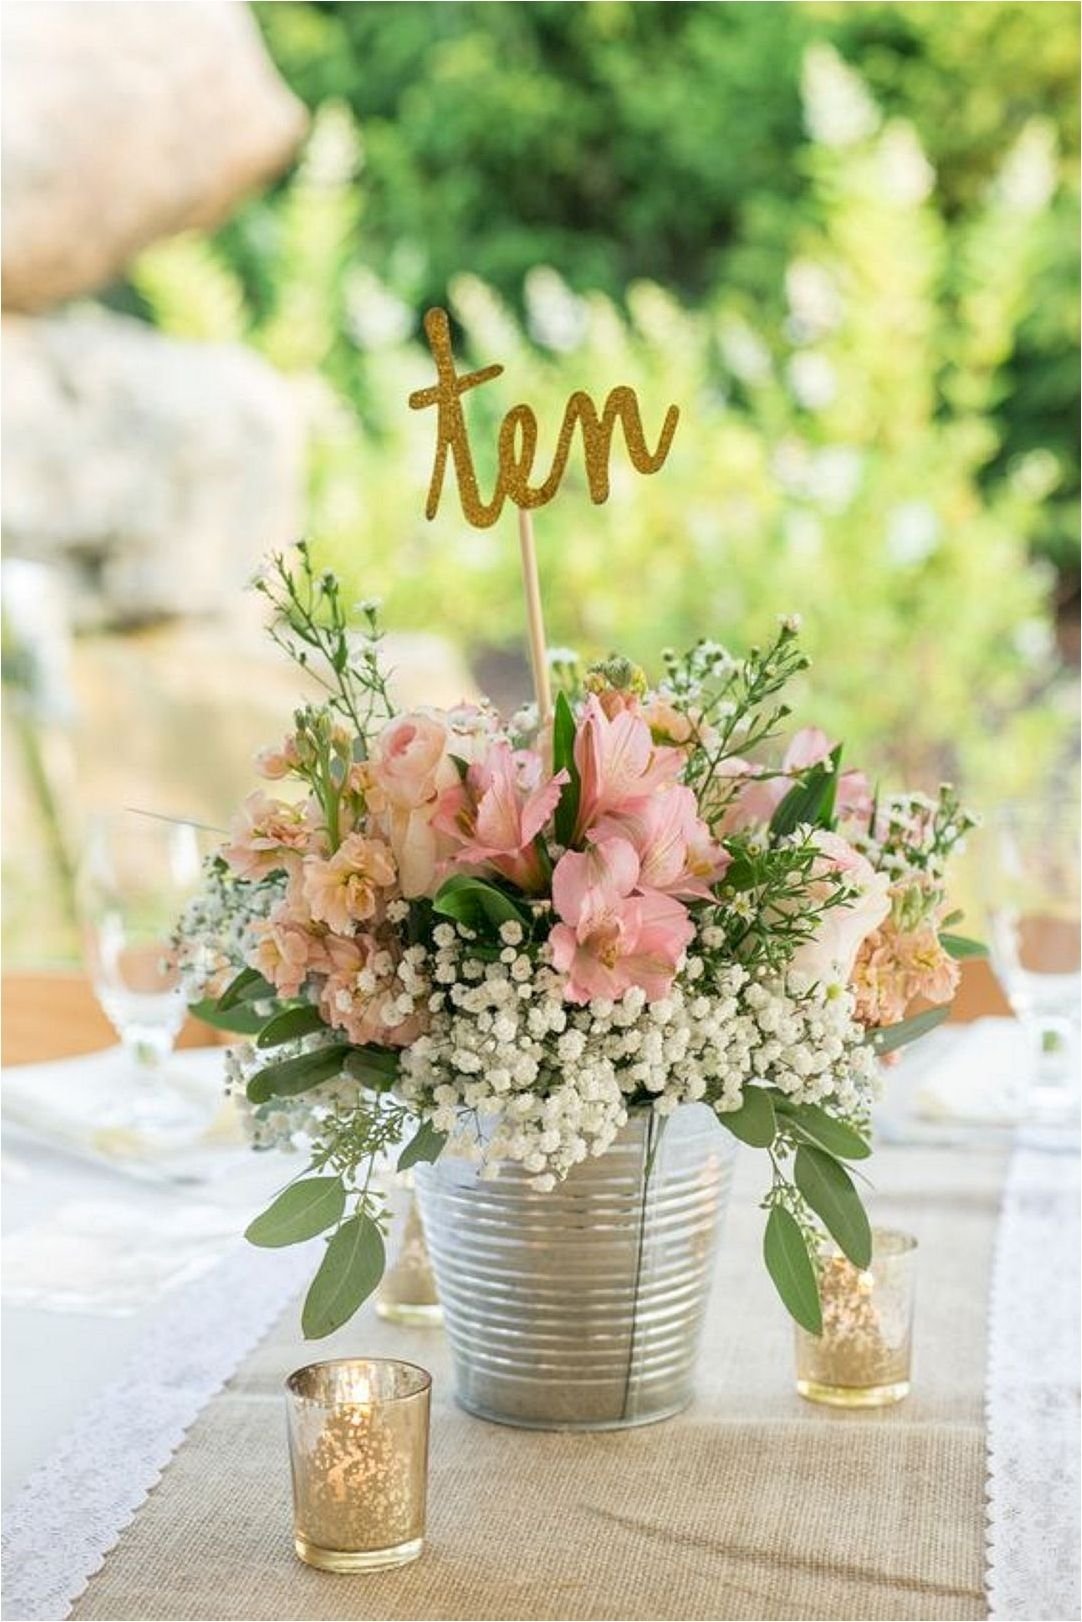 10 Most Recommended Wedding Table Centerpieces Ideas On A Budget cheap wedding centerpieces ideas 2017 wedding centerpieces 2022